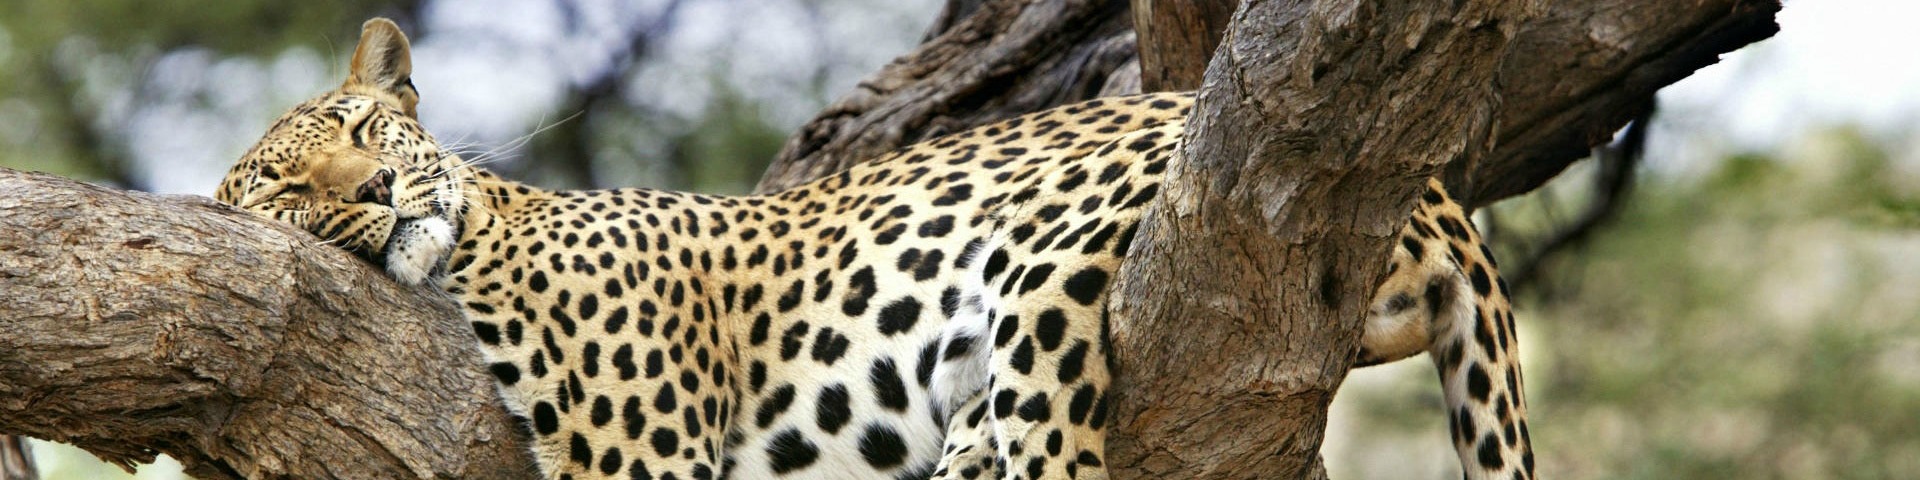 This Leopard Takes A Well Deserved Nap